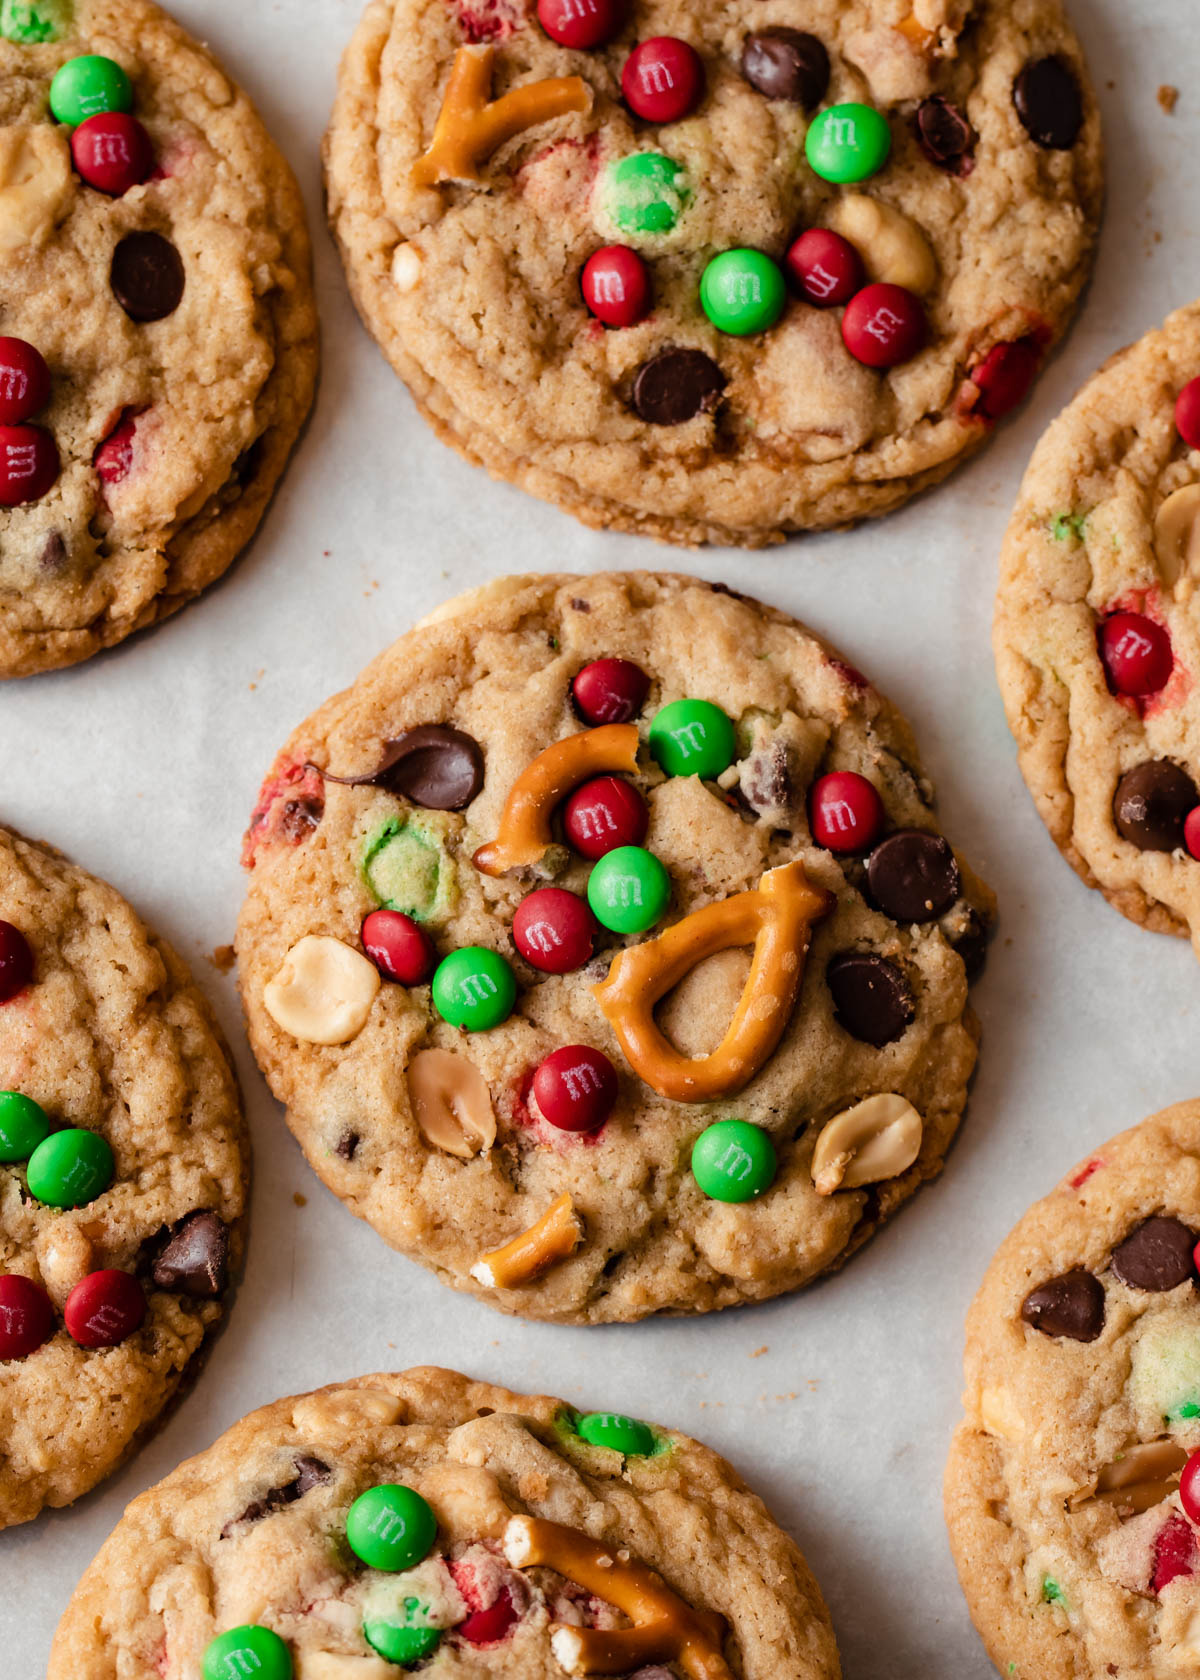 Kitchen sink cookies with mini m&ms, peanuts, and pretzel pieces